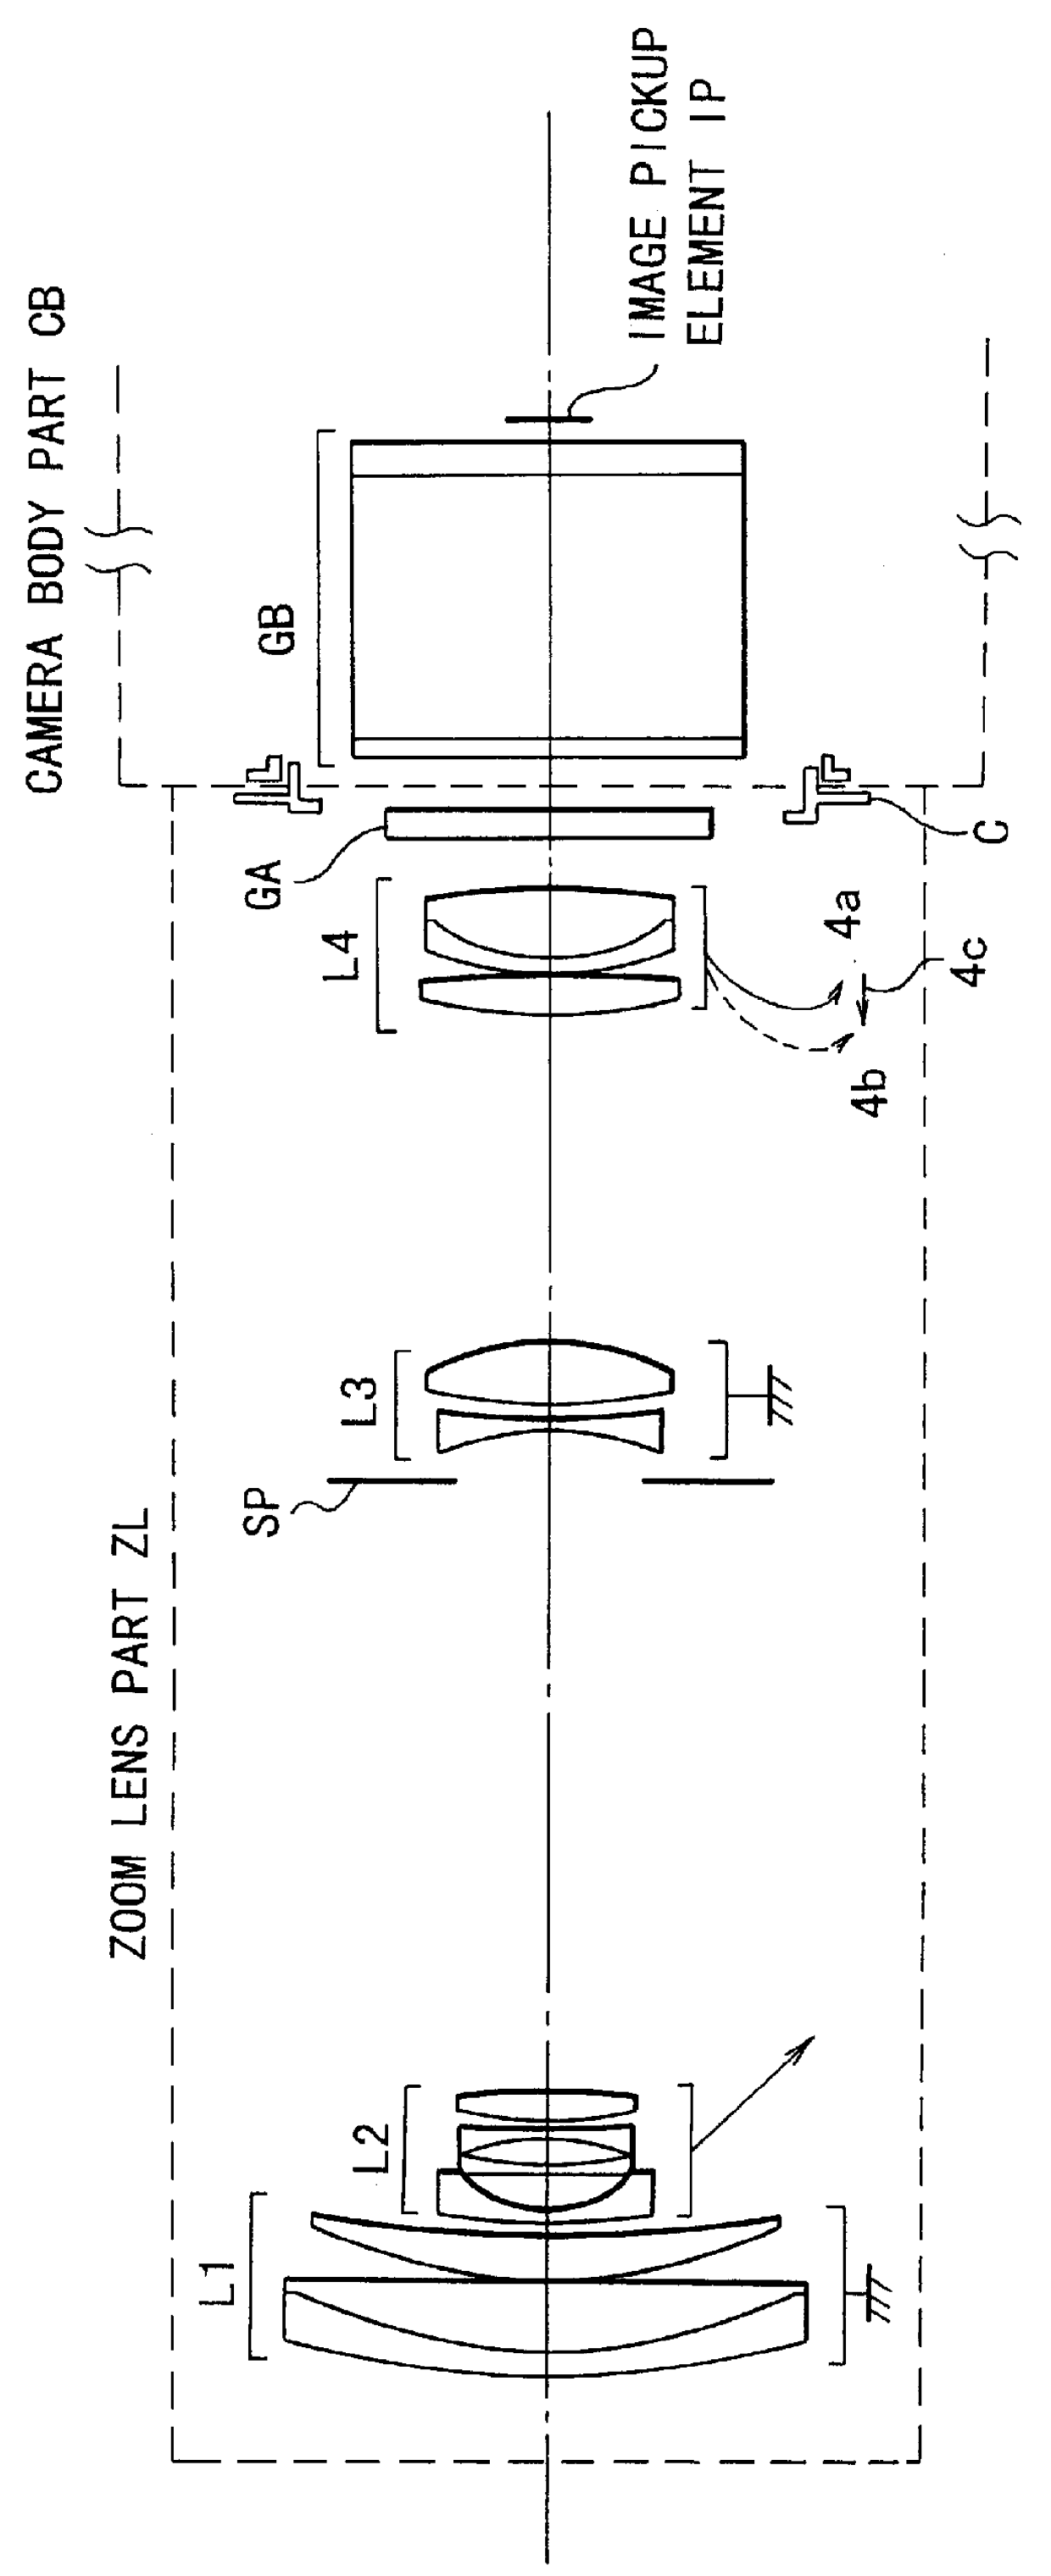 Zoom lens of rear focus type and image pickup apparatus